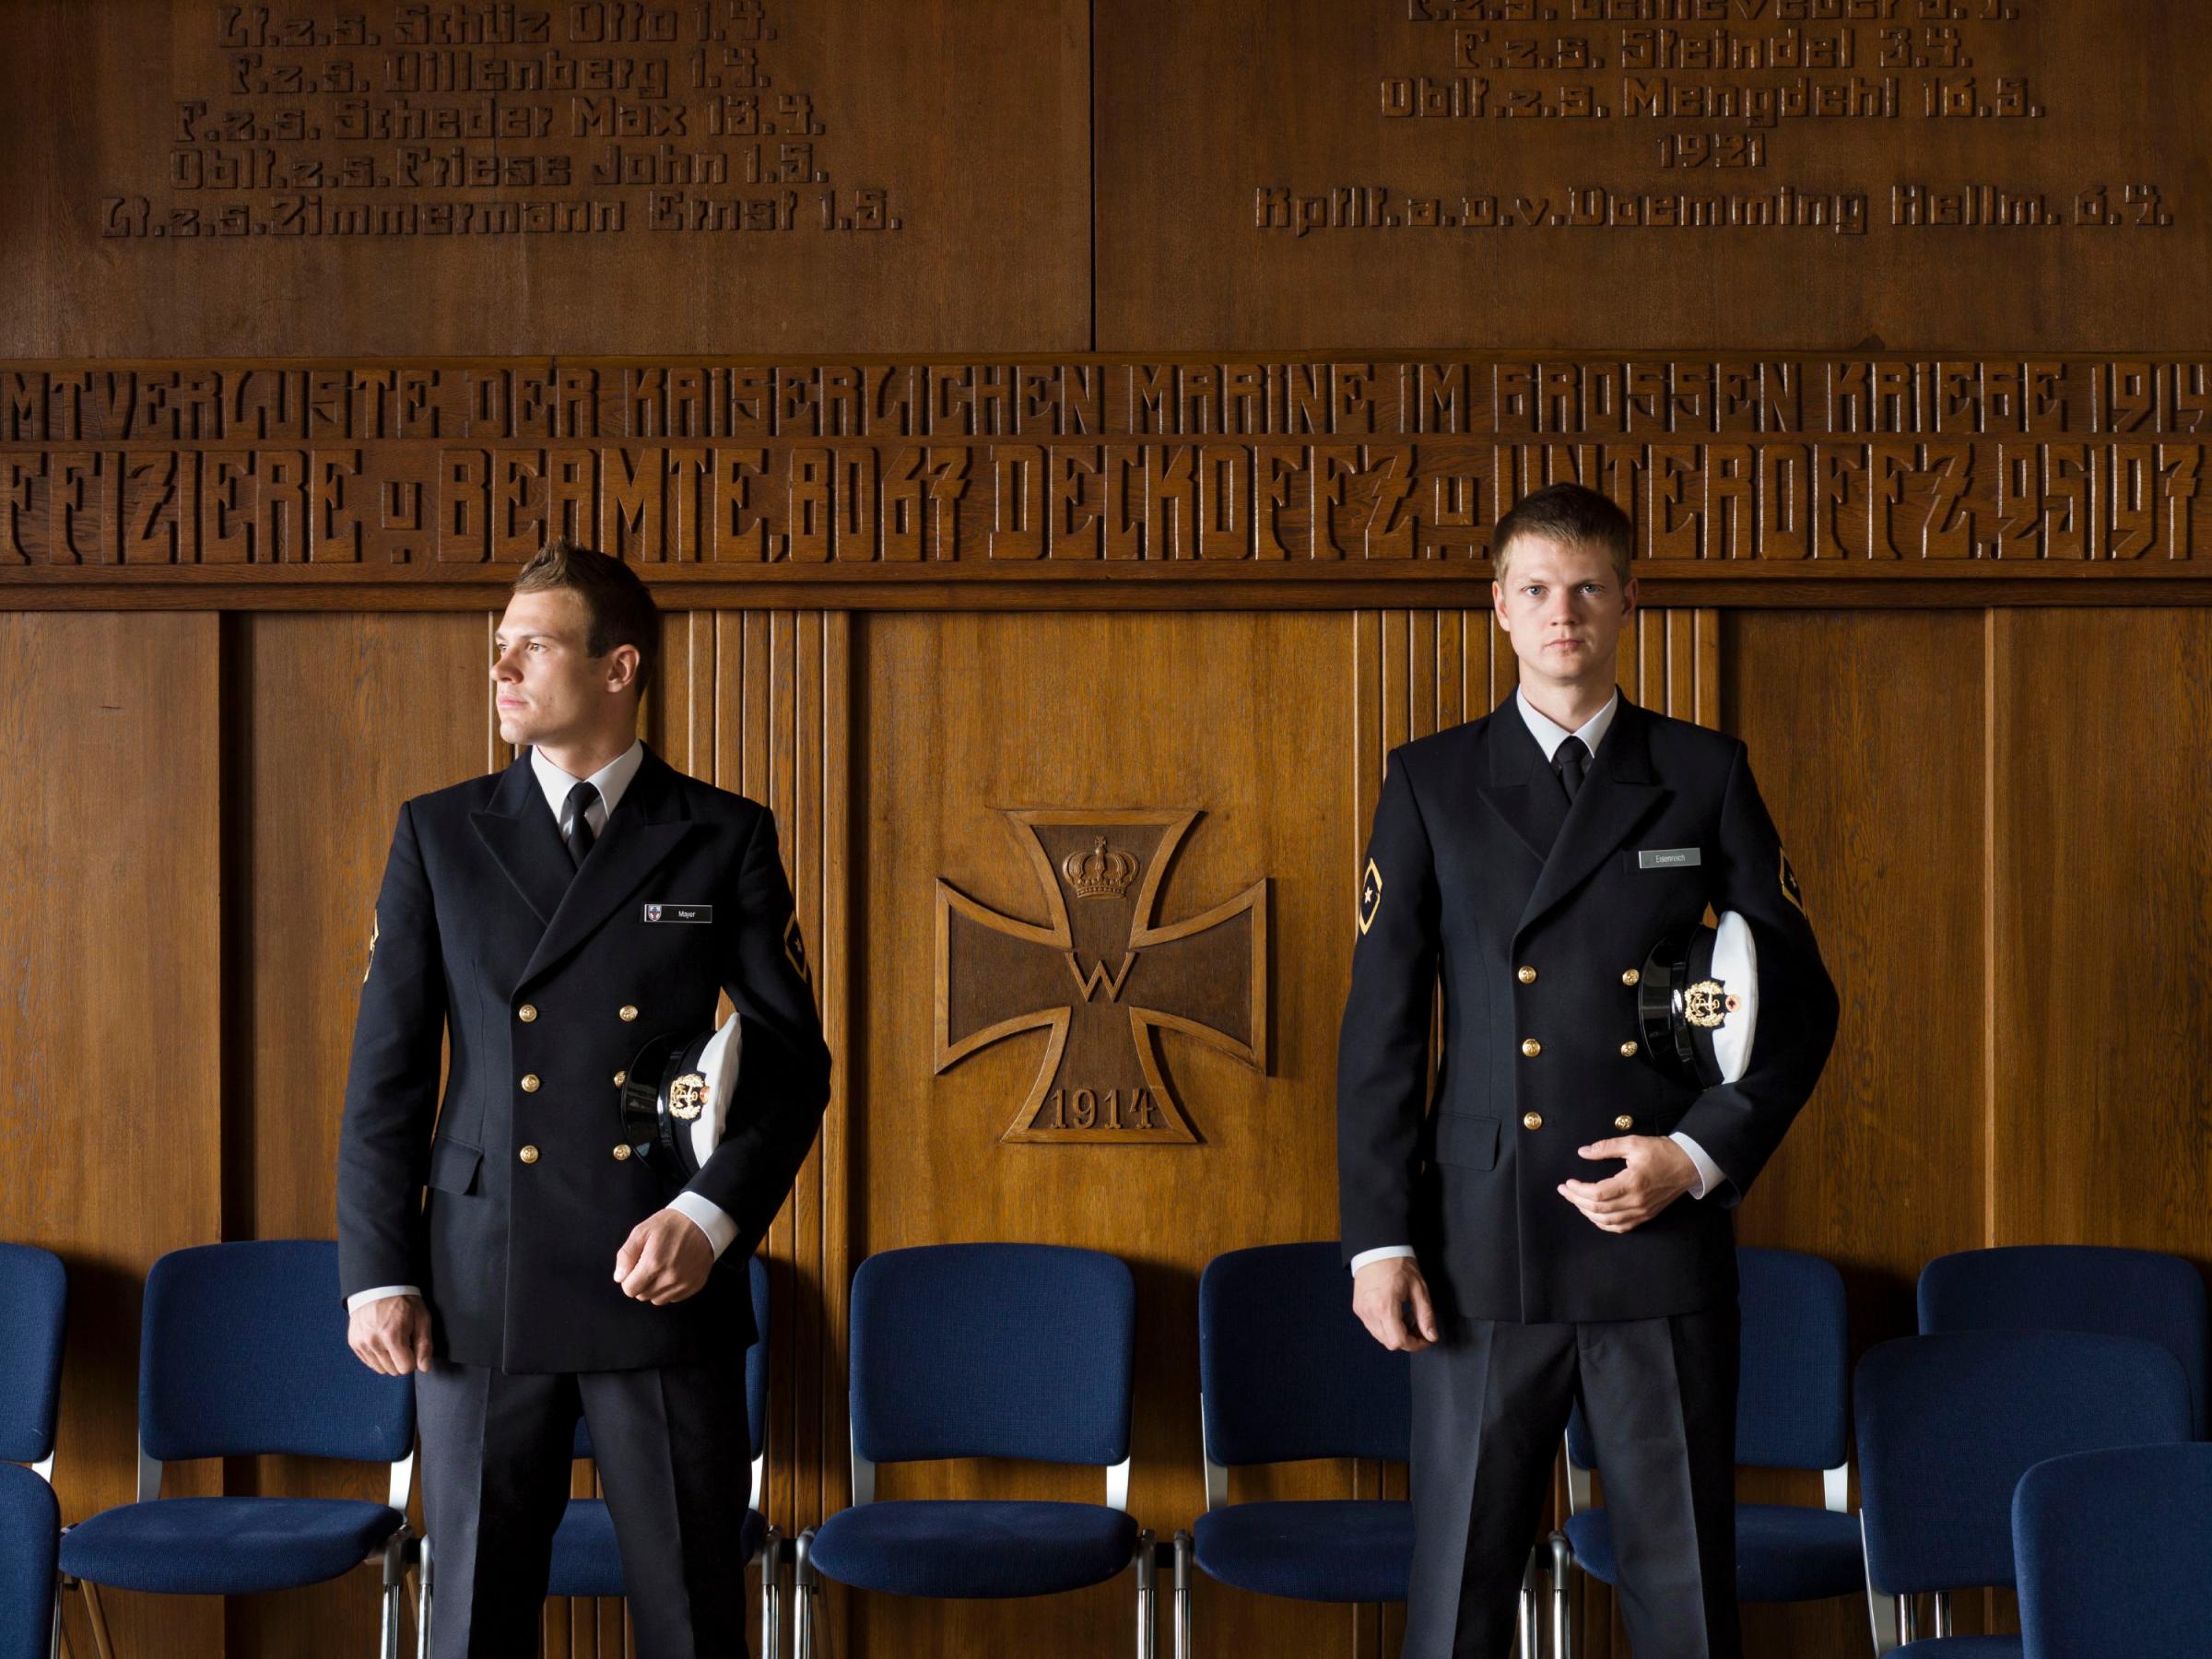 From left: Cadets Mayer and Eisenreich at Marineschule Mürwik, Mürwik, Germany, July 19, 2011.